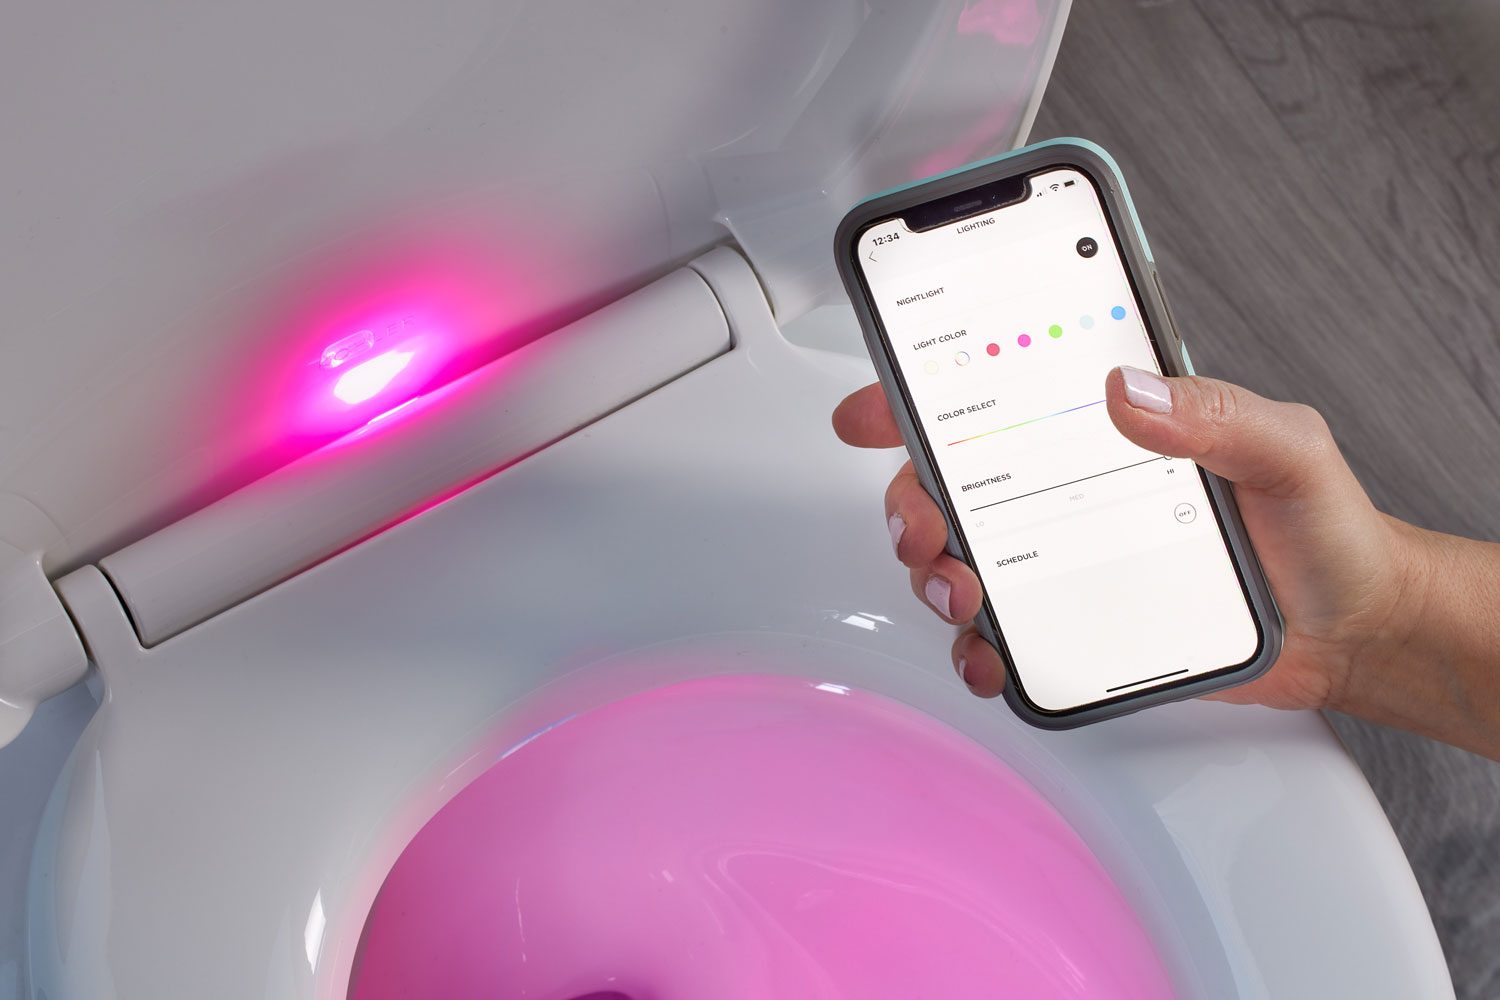 Testing an app that sets the color of the toilet seat light